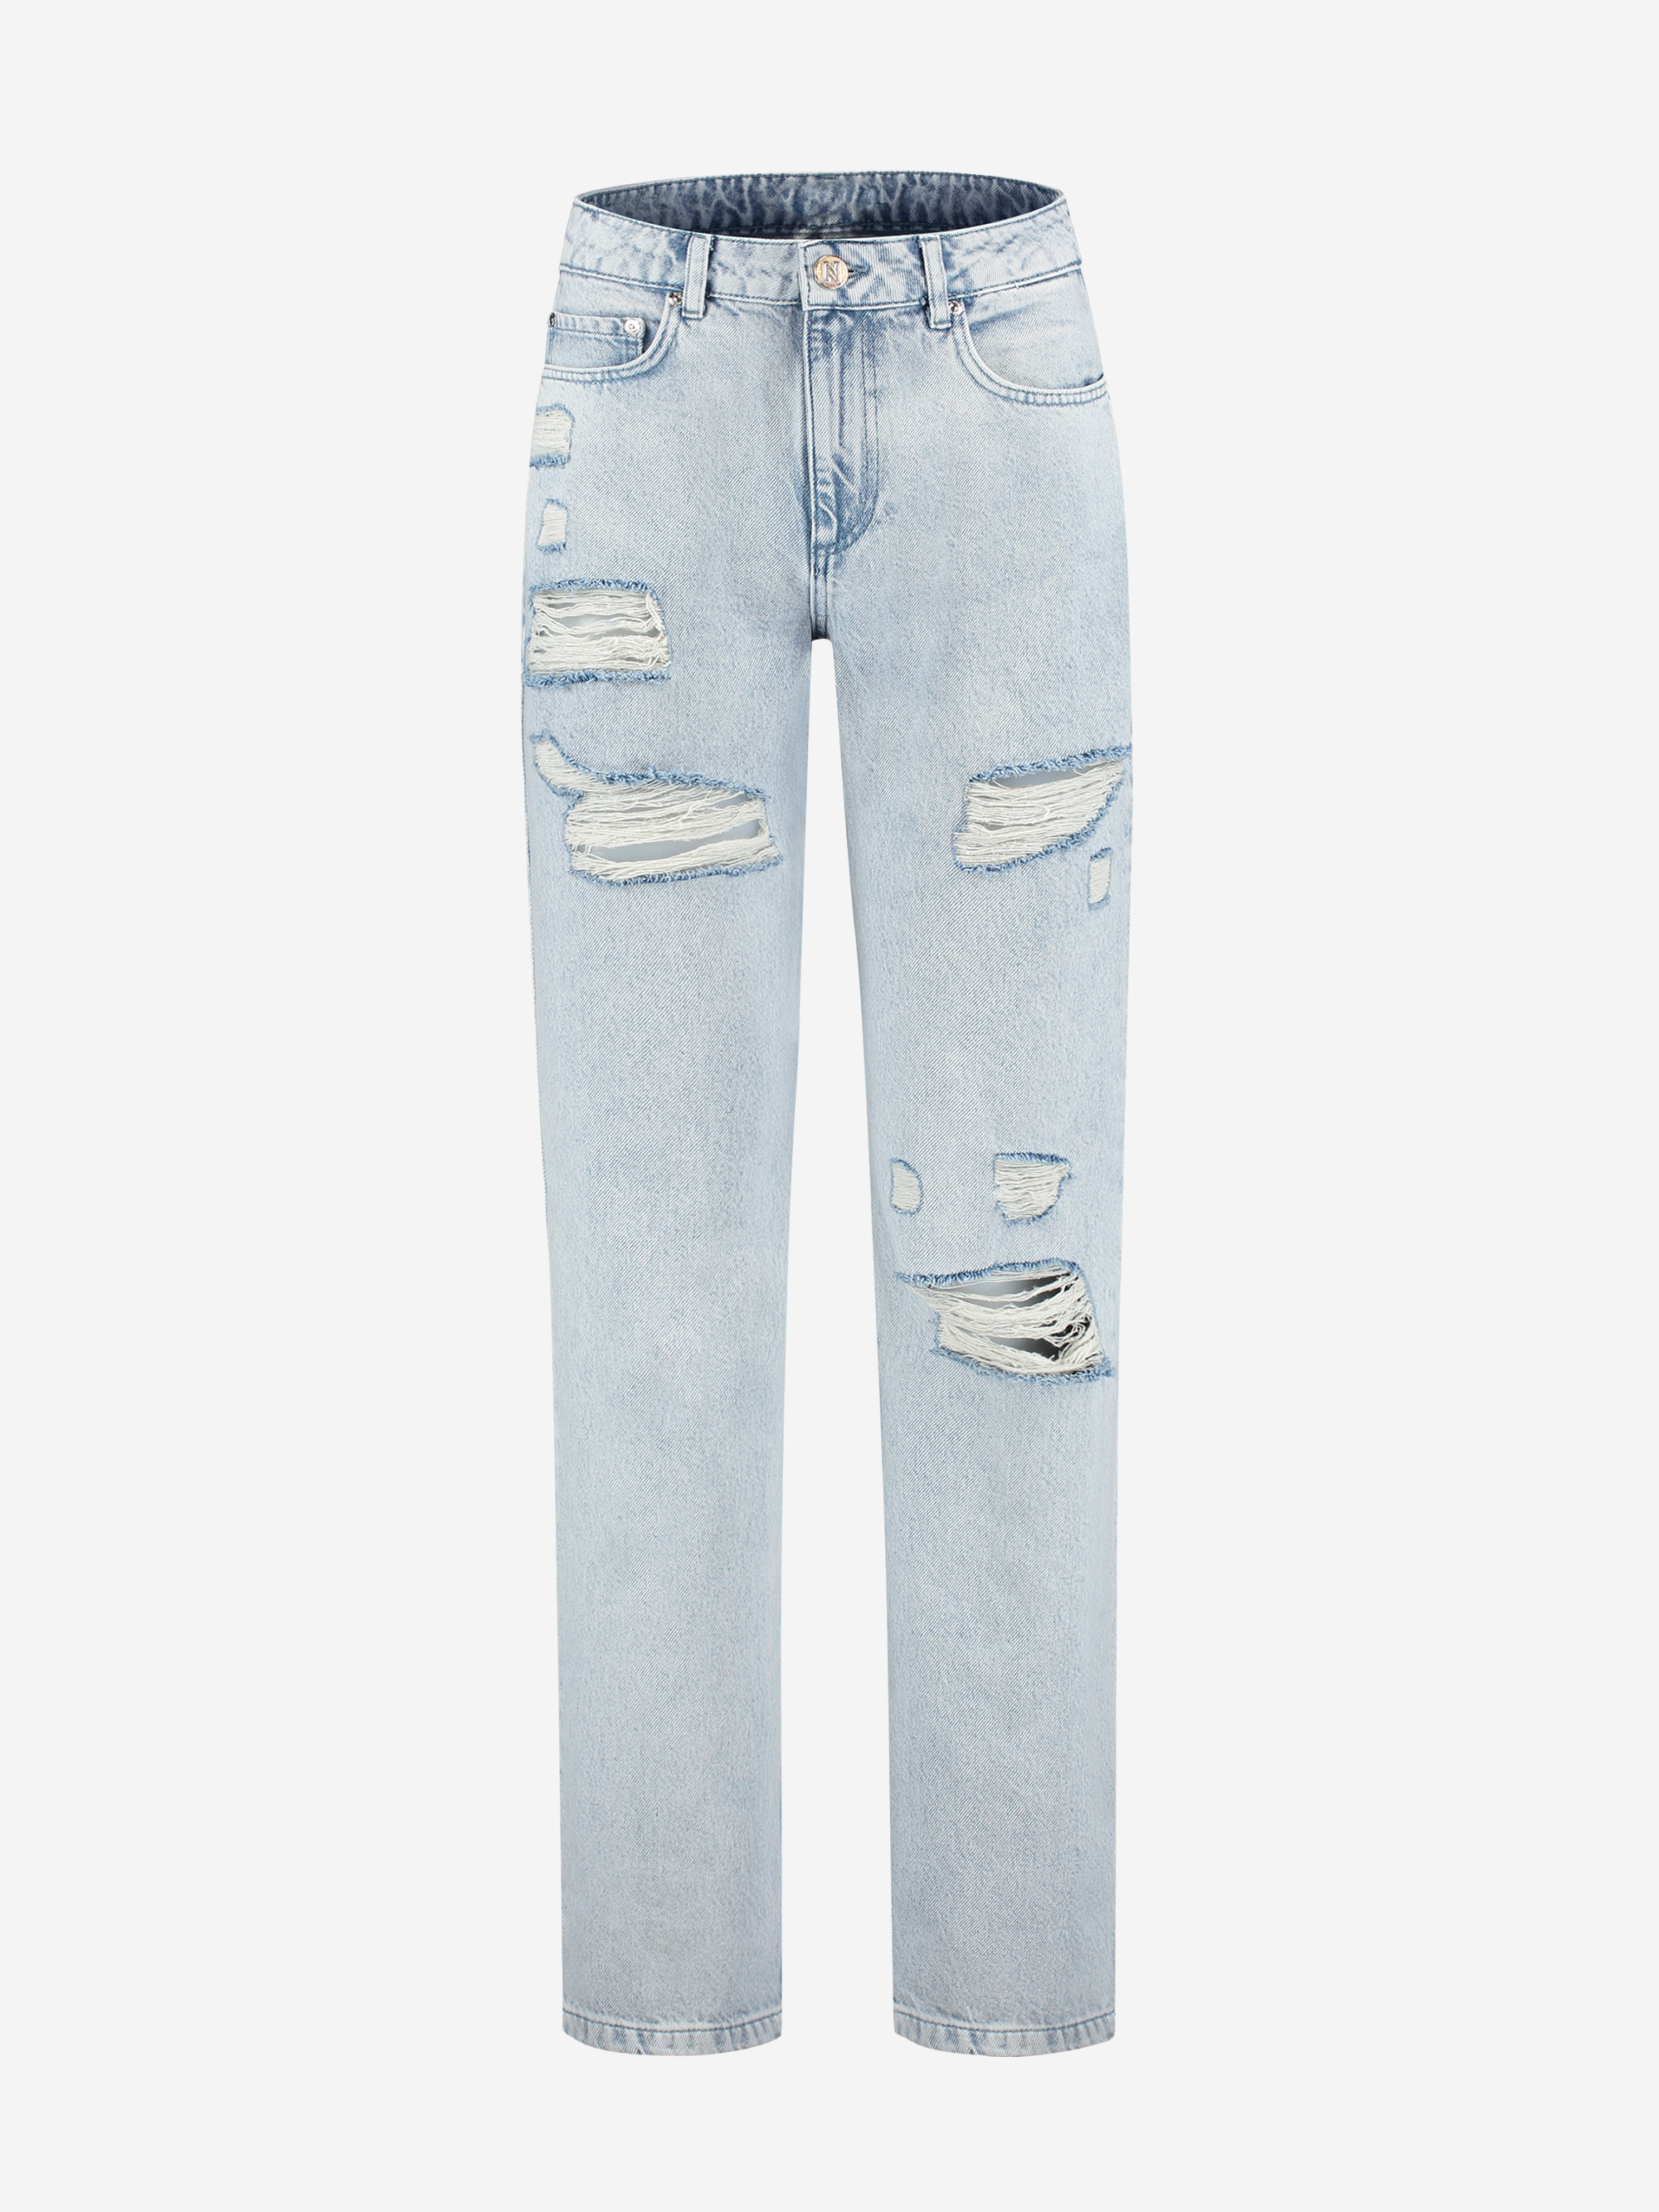 Straight leg jeans with tears